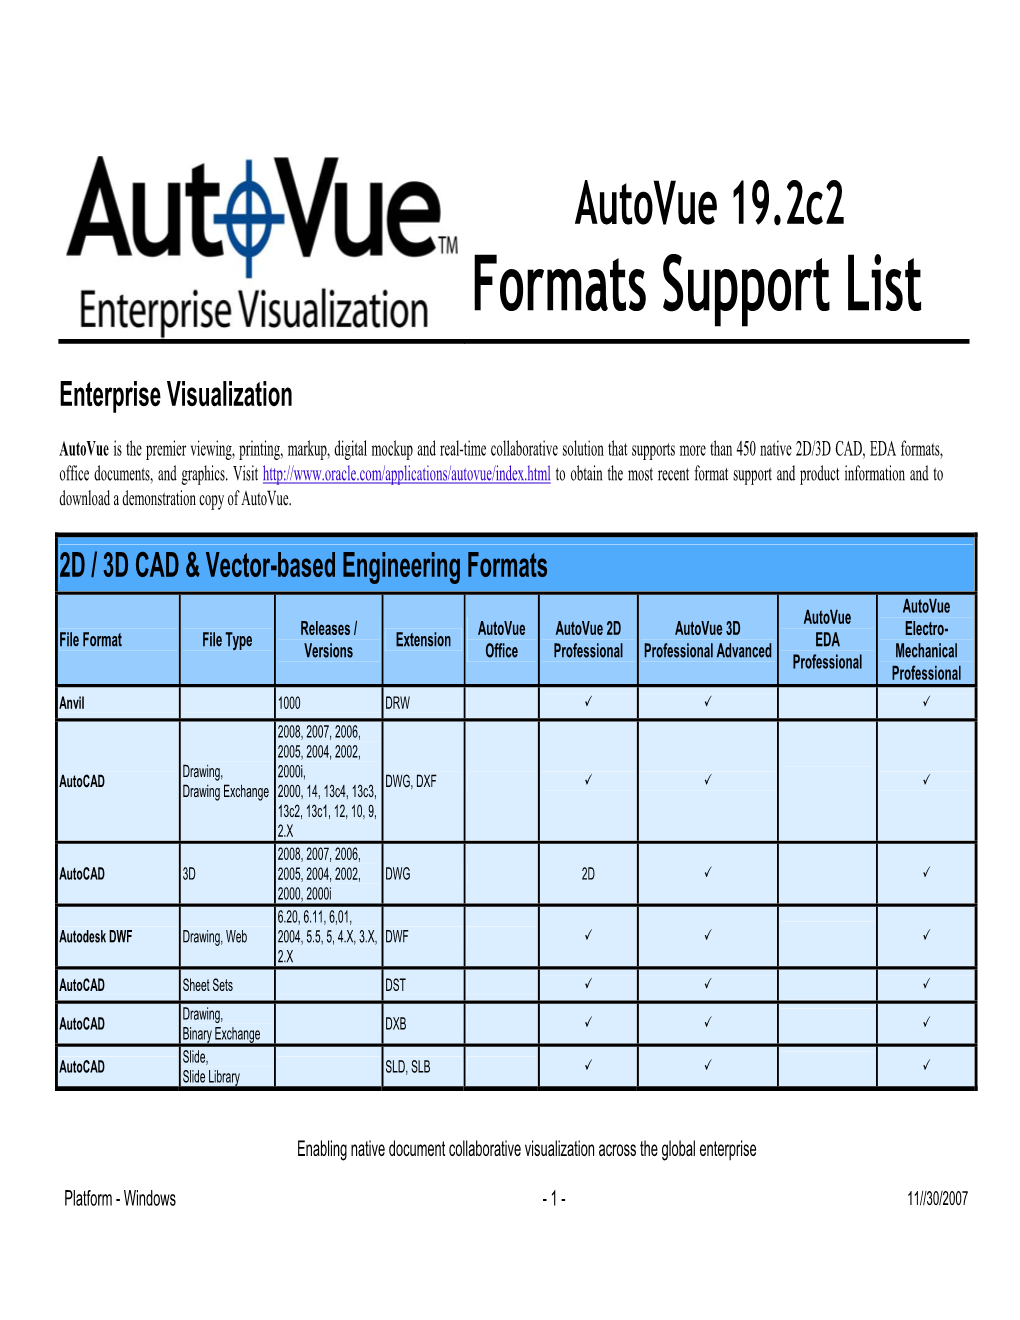 Formats Support Document